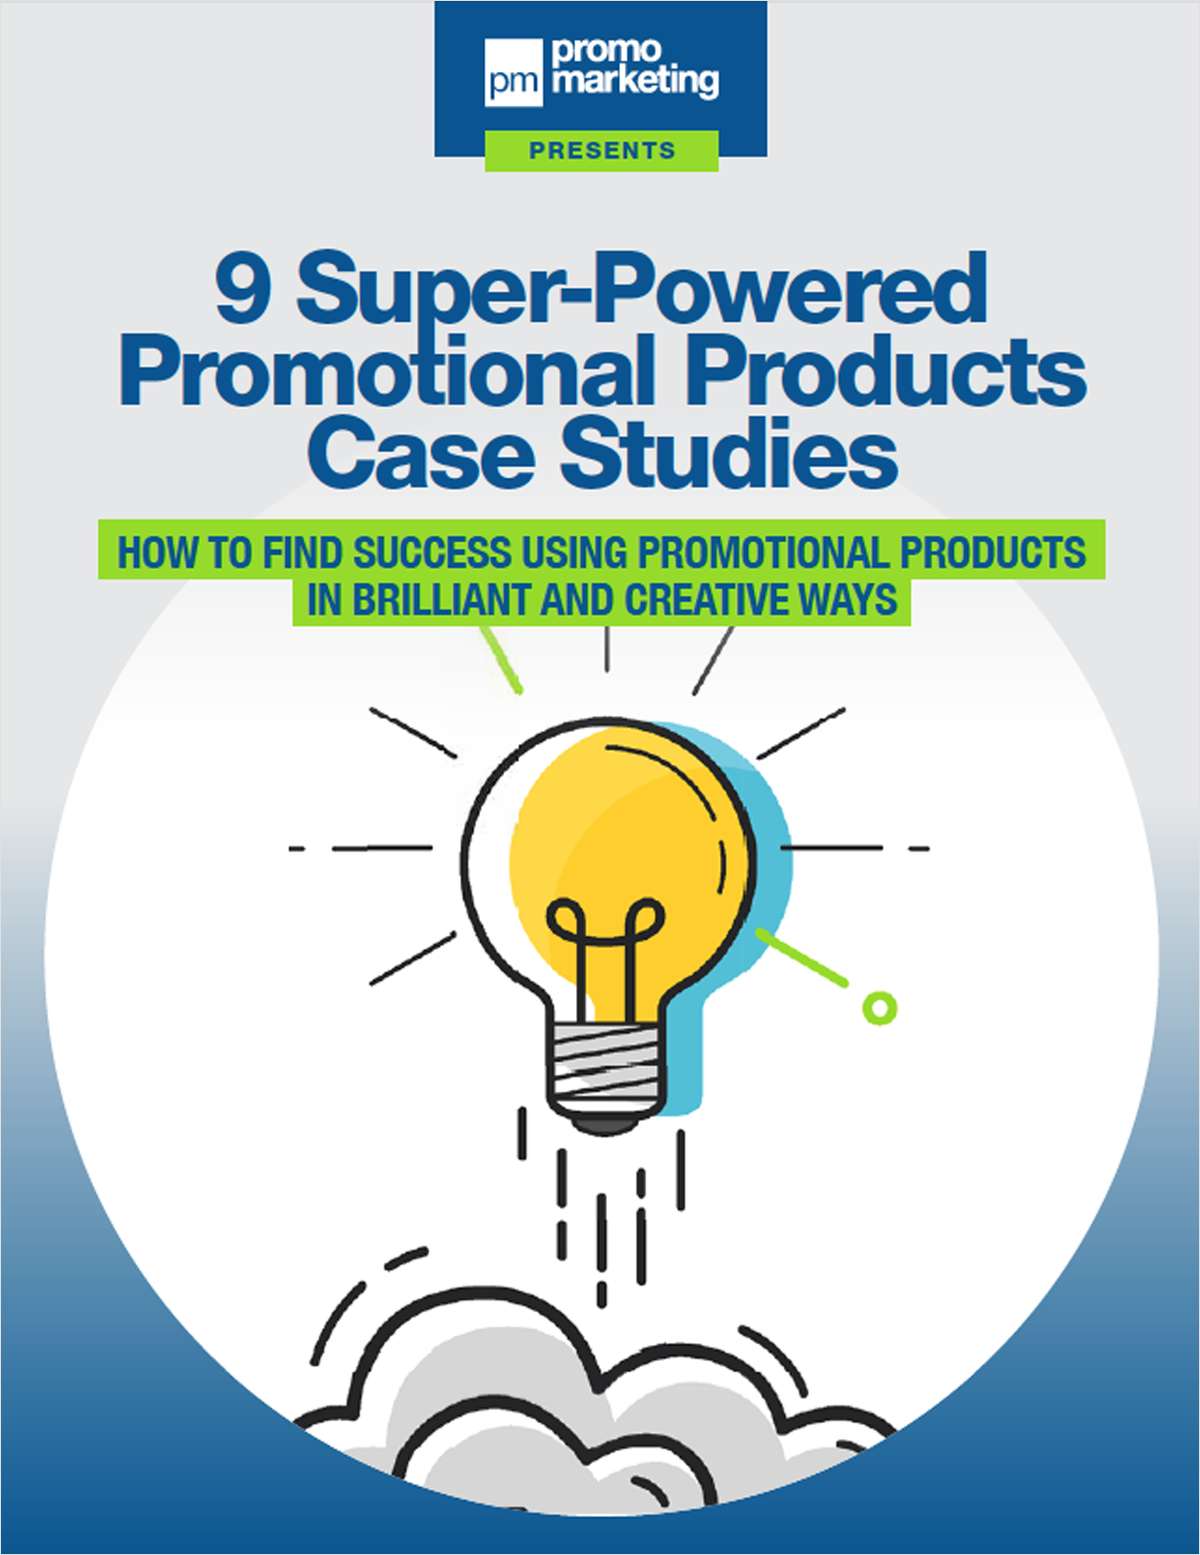 9 Super-Powered Promotional Products Case Studies